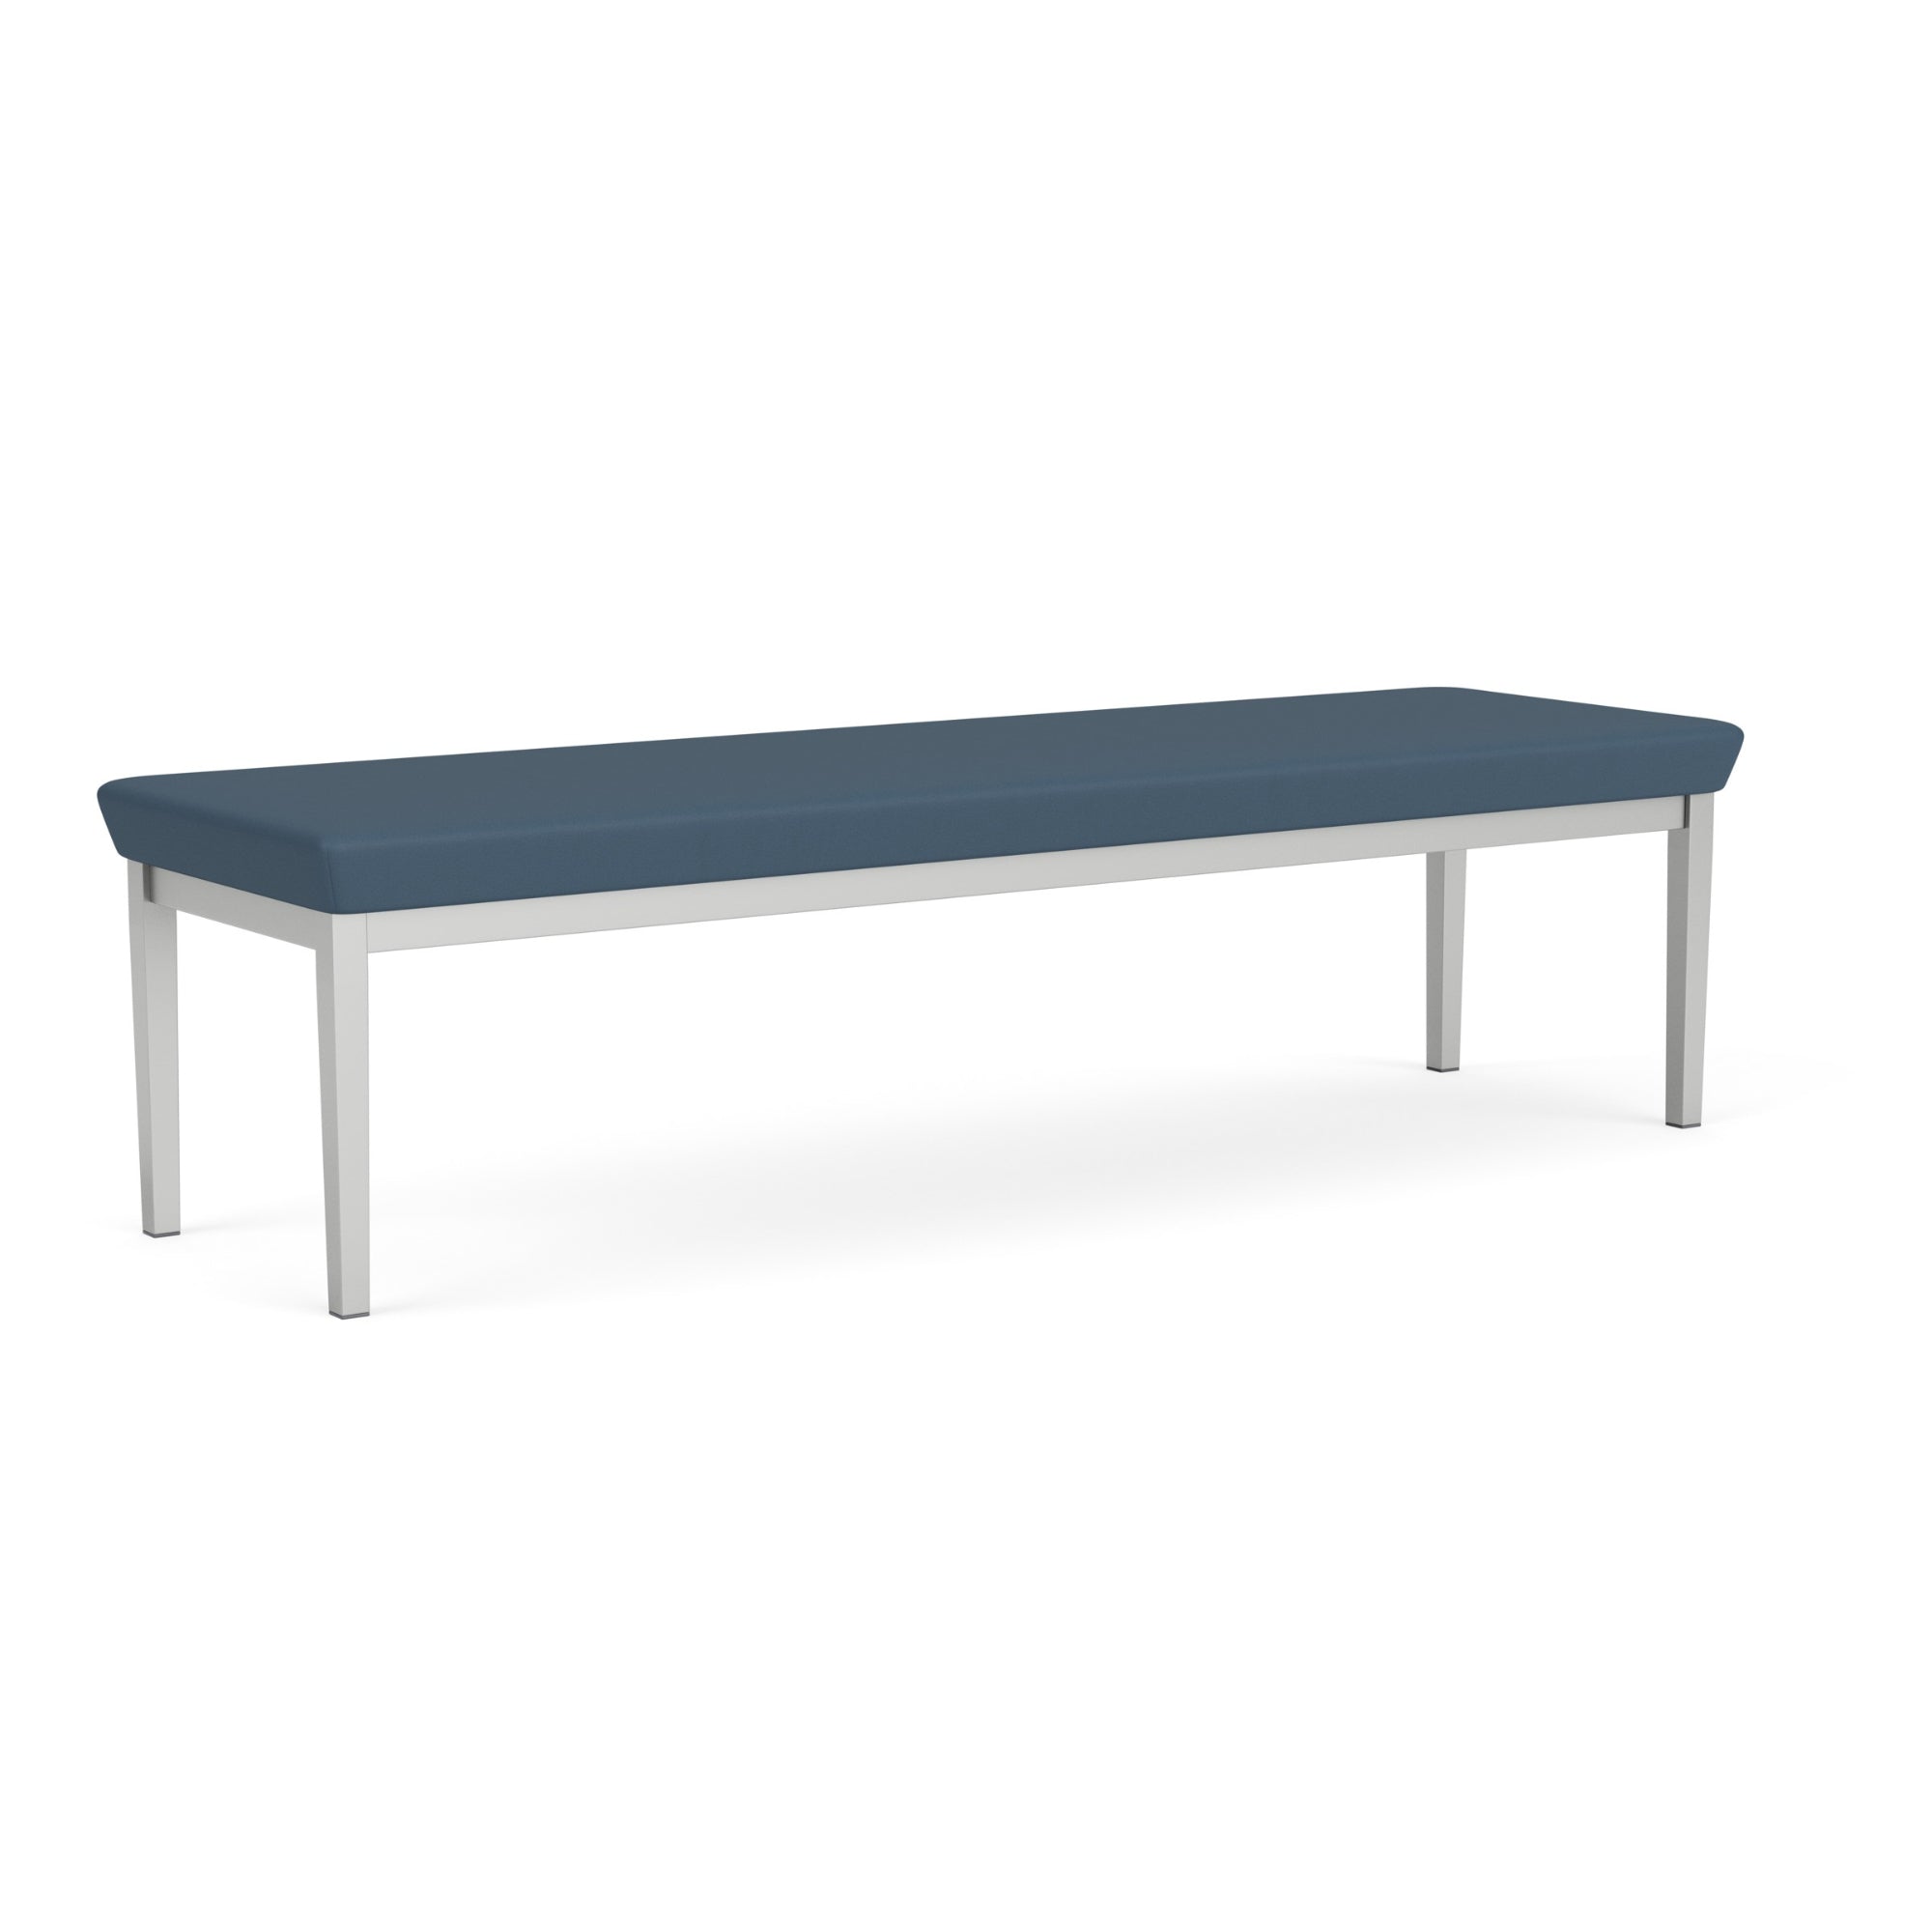 Lenox Steel Collection Reception Seating, 3 Seat Bench, Standard Vinyl Upholstery, FREE SHIPPING